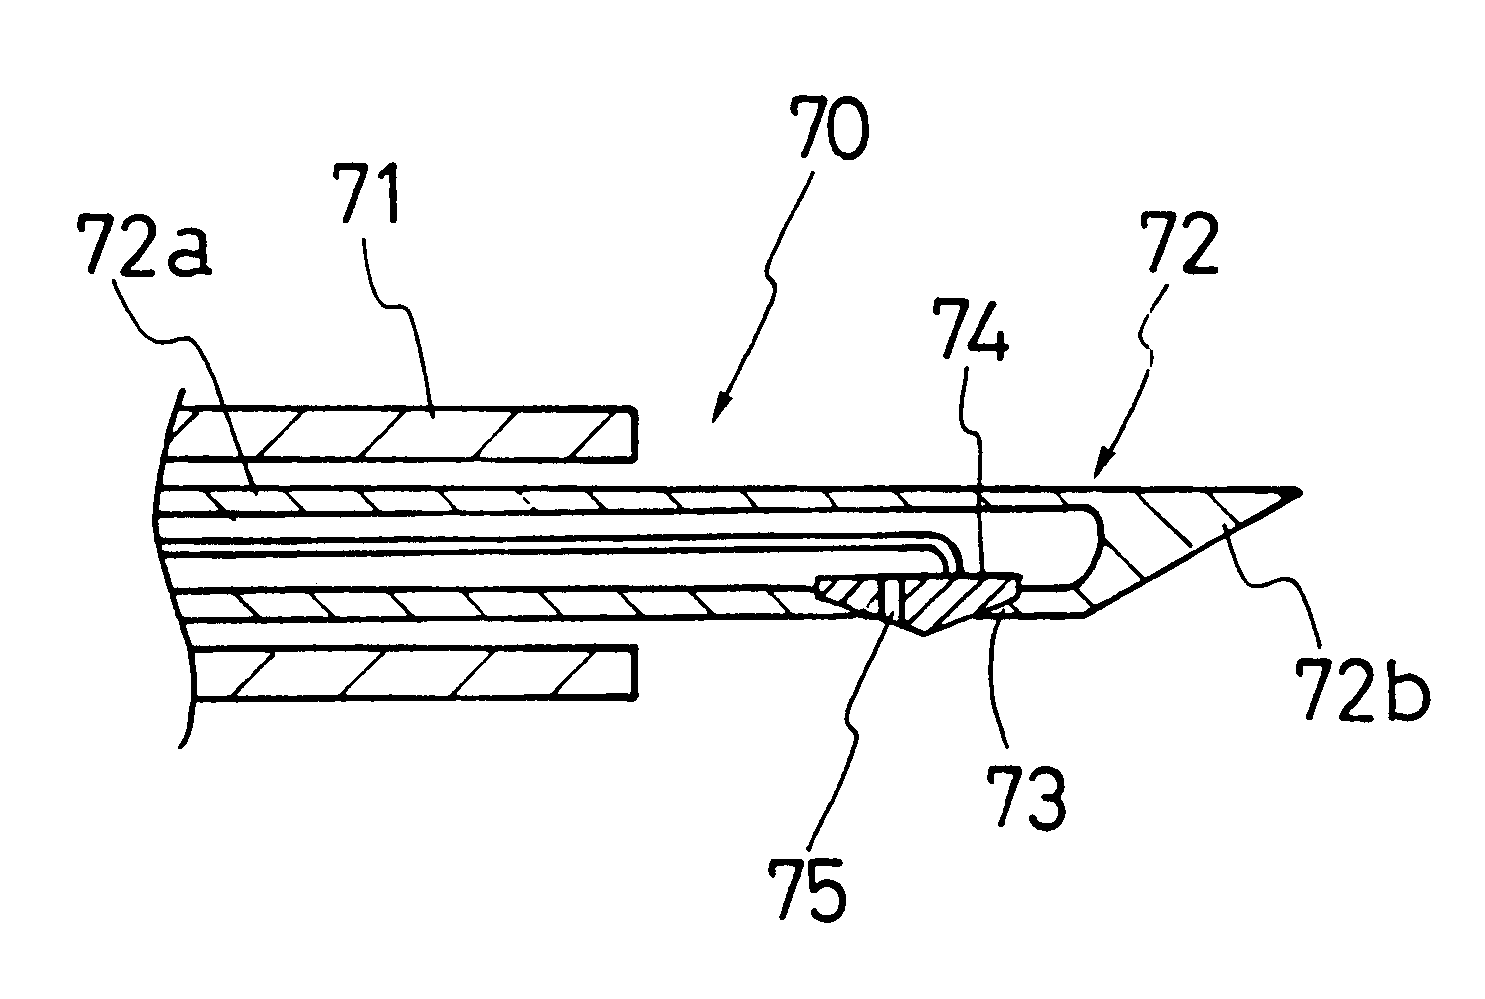 Puncture instrument for punctured high frequency treatments